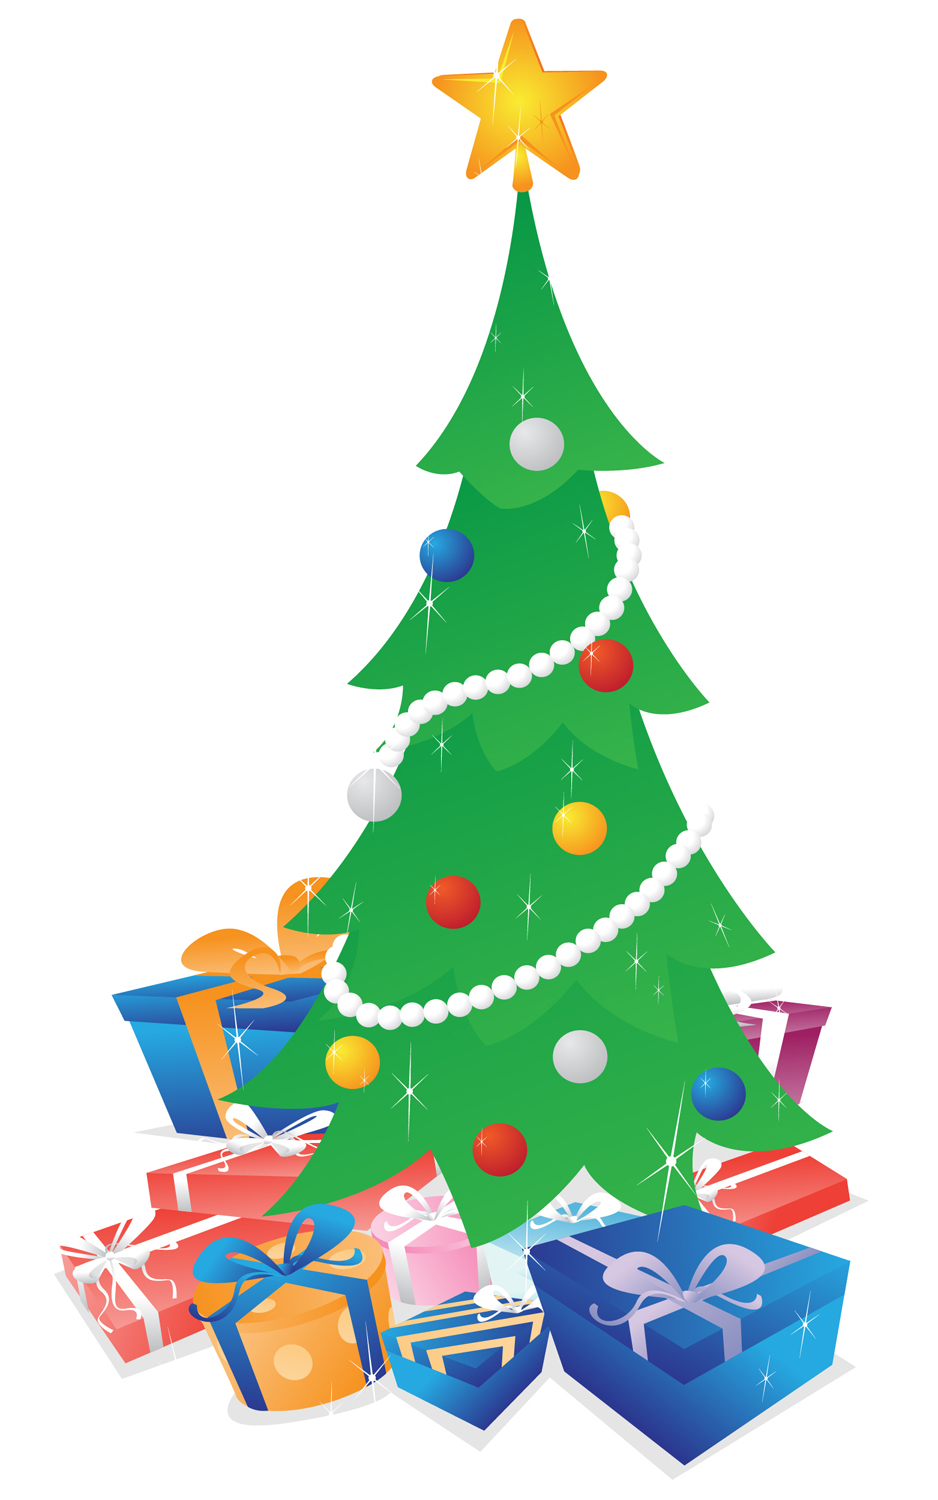 Christmas Tree with Presents — Vector illustration of a shimmering